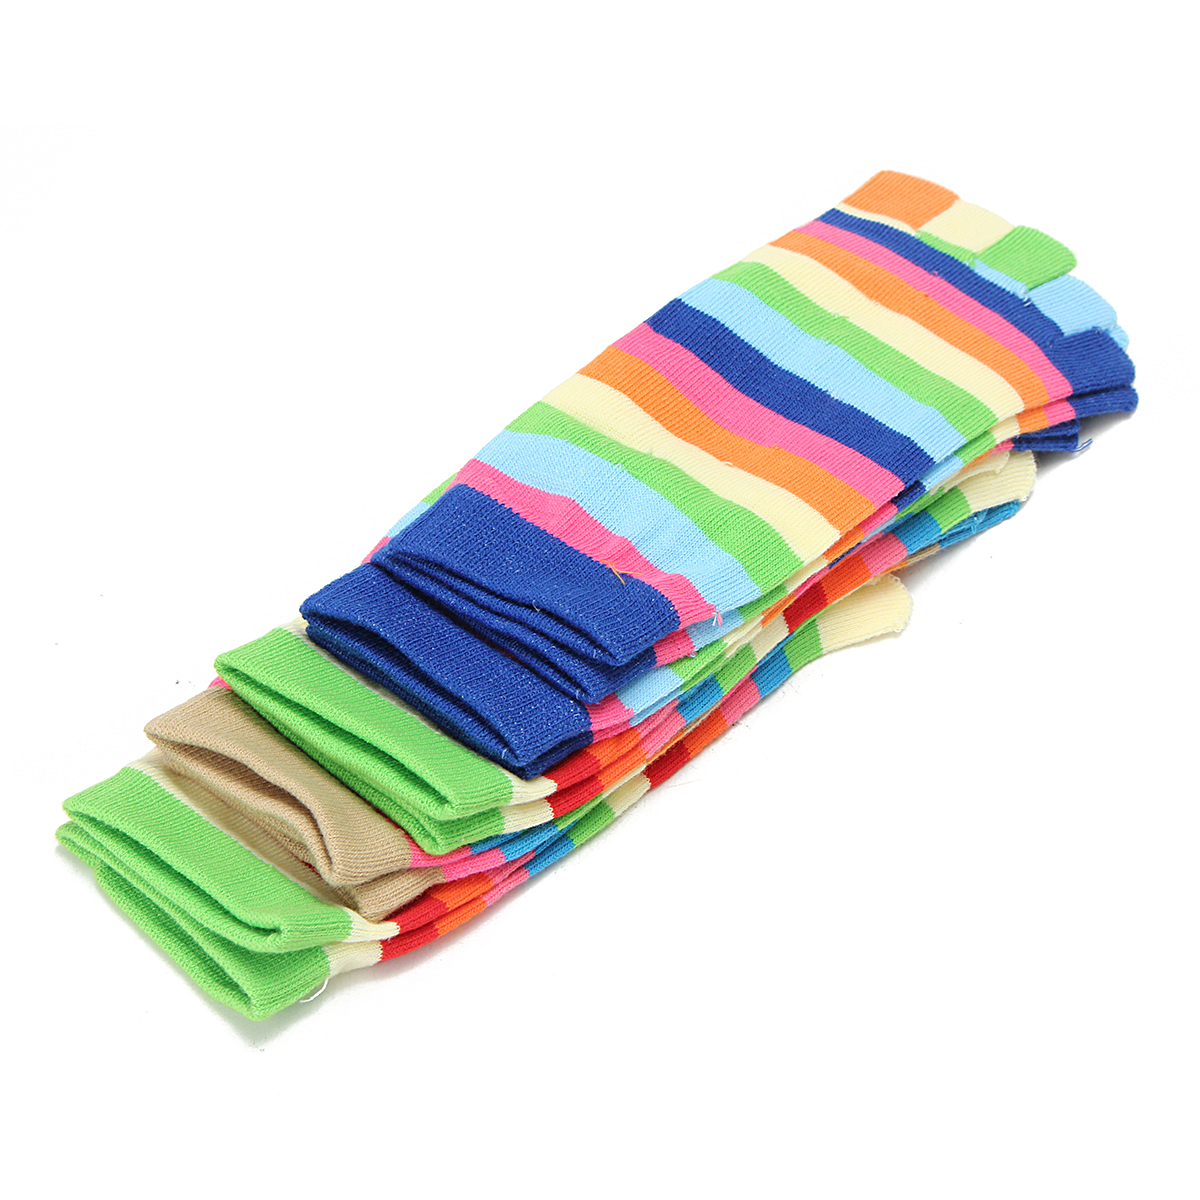 New-5-Pairs-Lot-Colorful-Women-Girl-Color-Stripes-Five-Finger-Toe-Socks-Hosiery-1245688